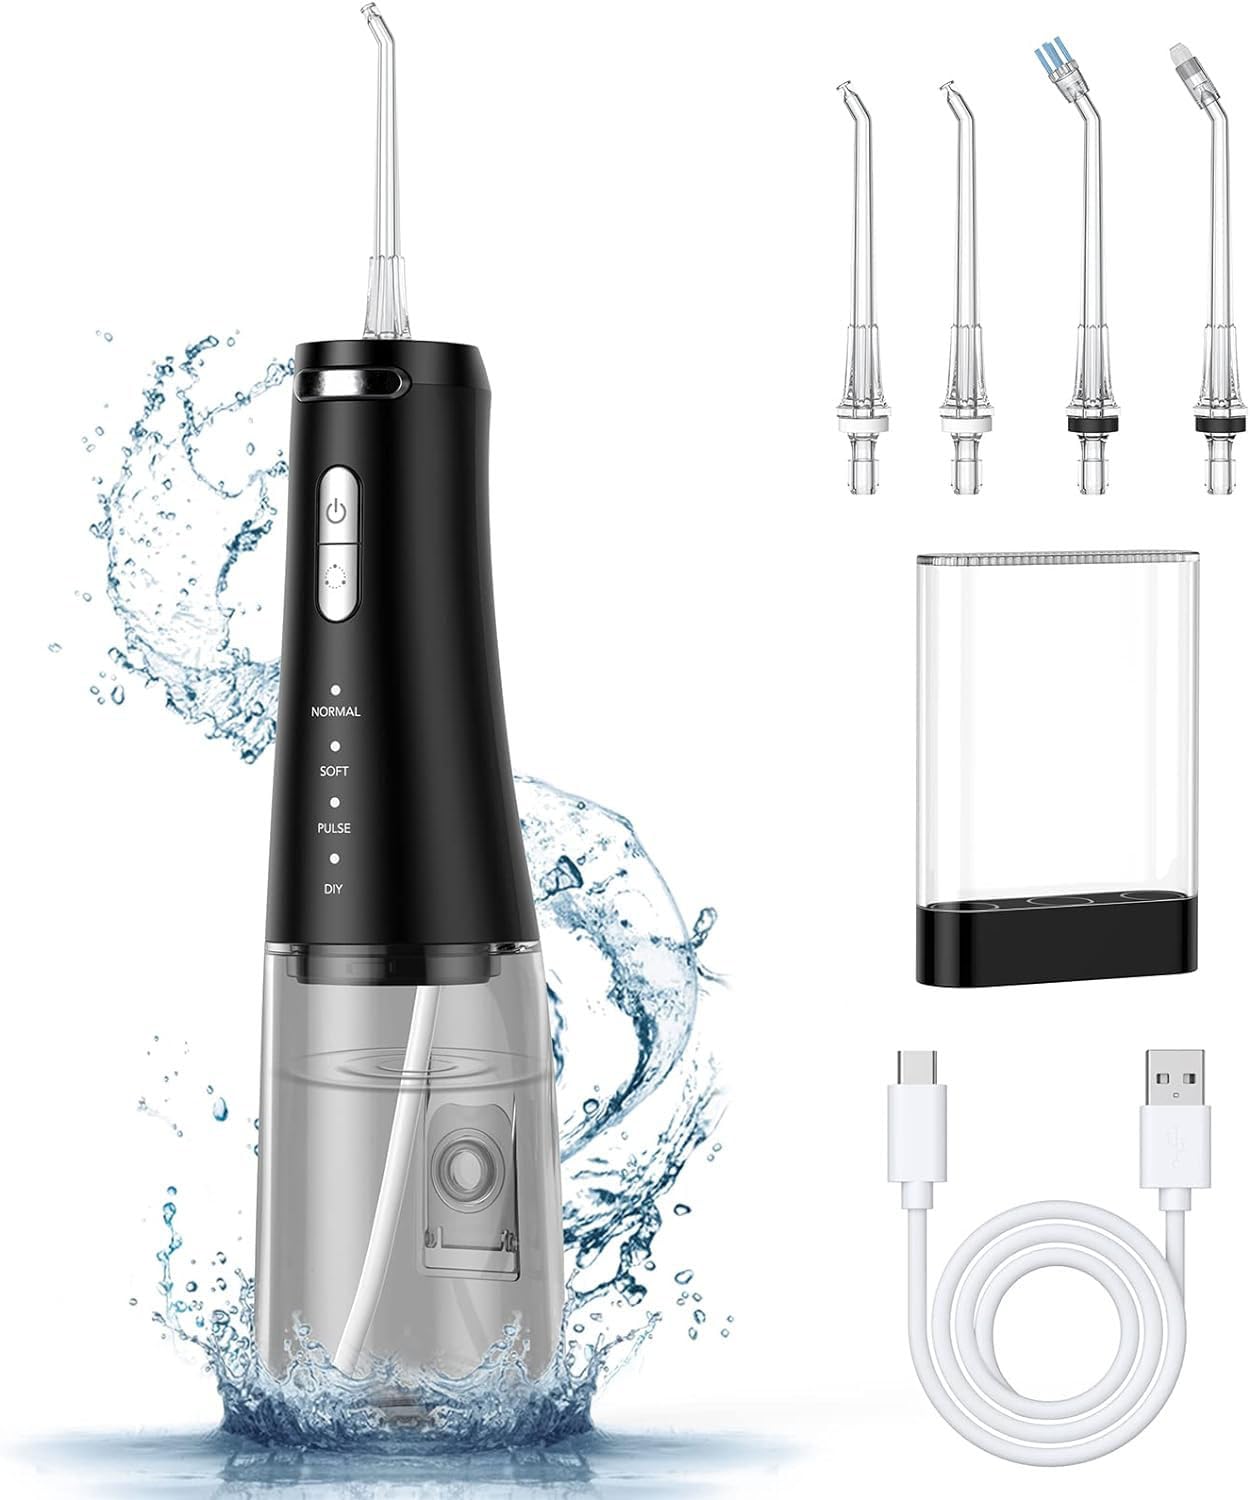 Cordless Water Flosser Dental, 2500mAh Battery with USB